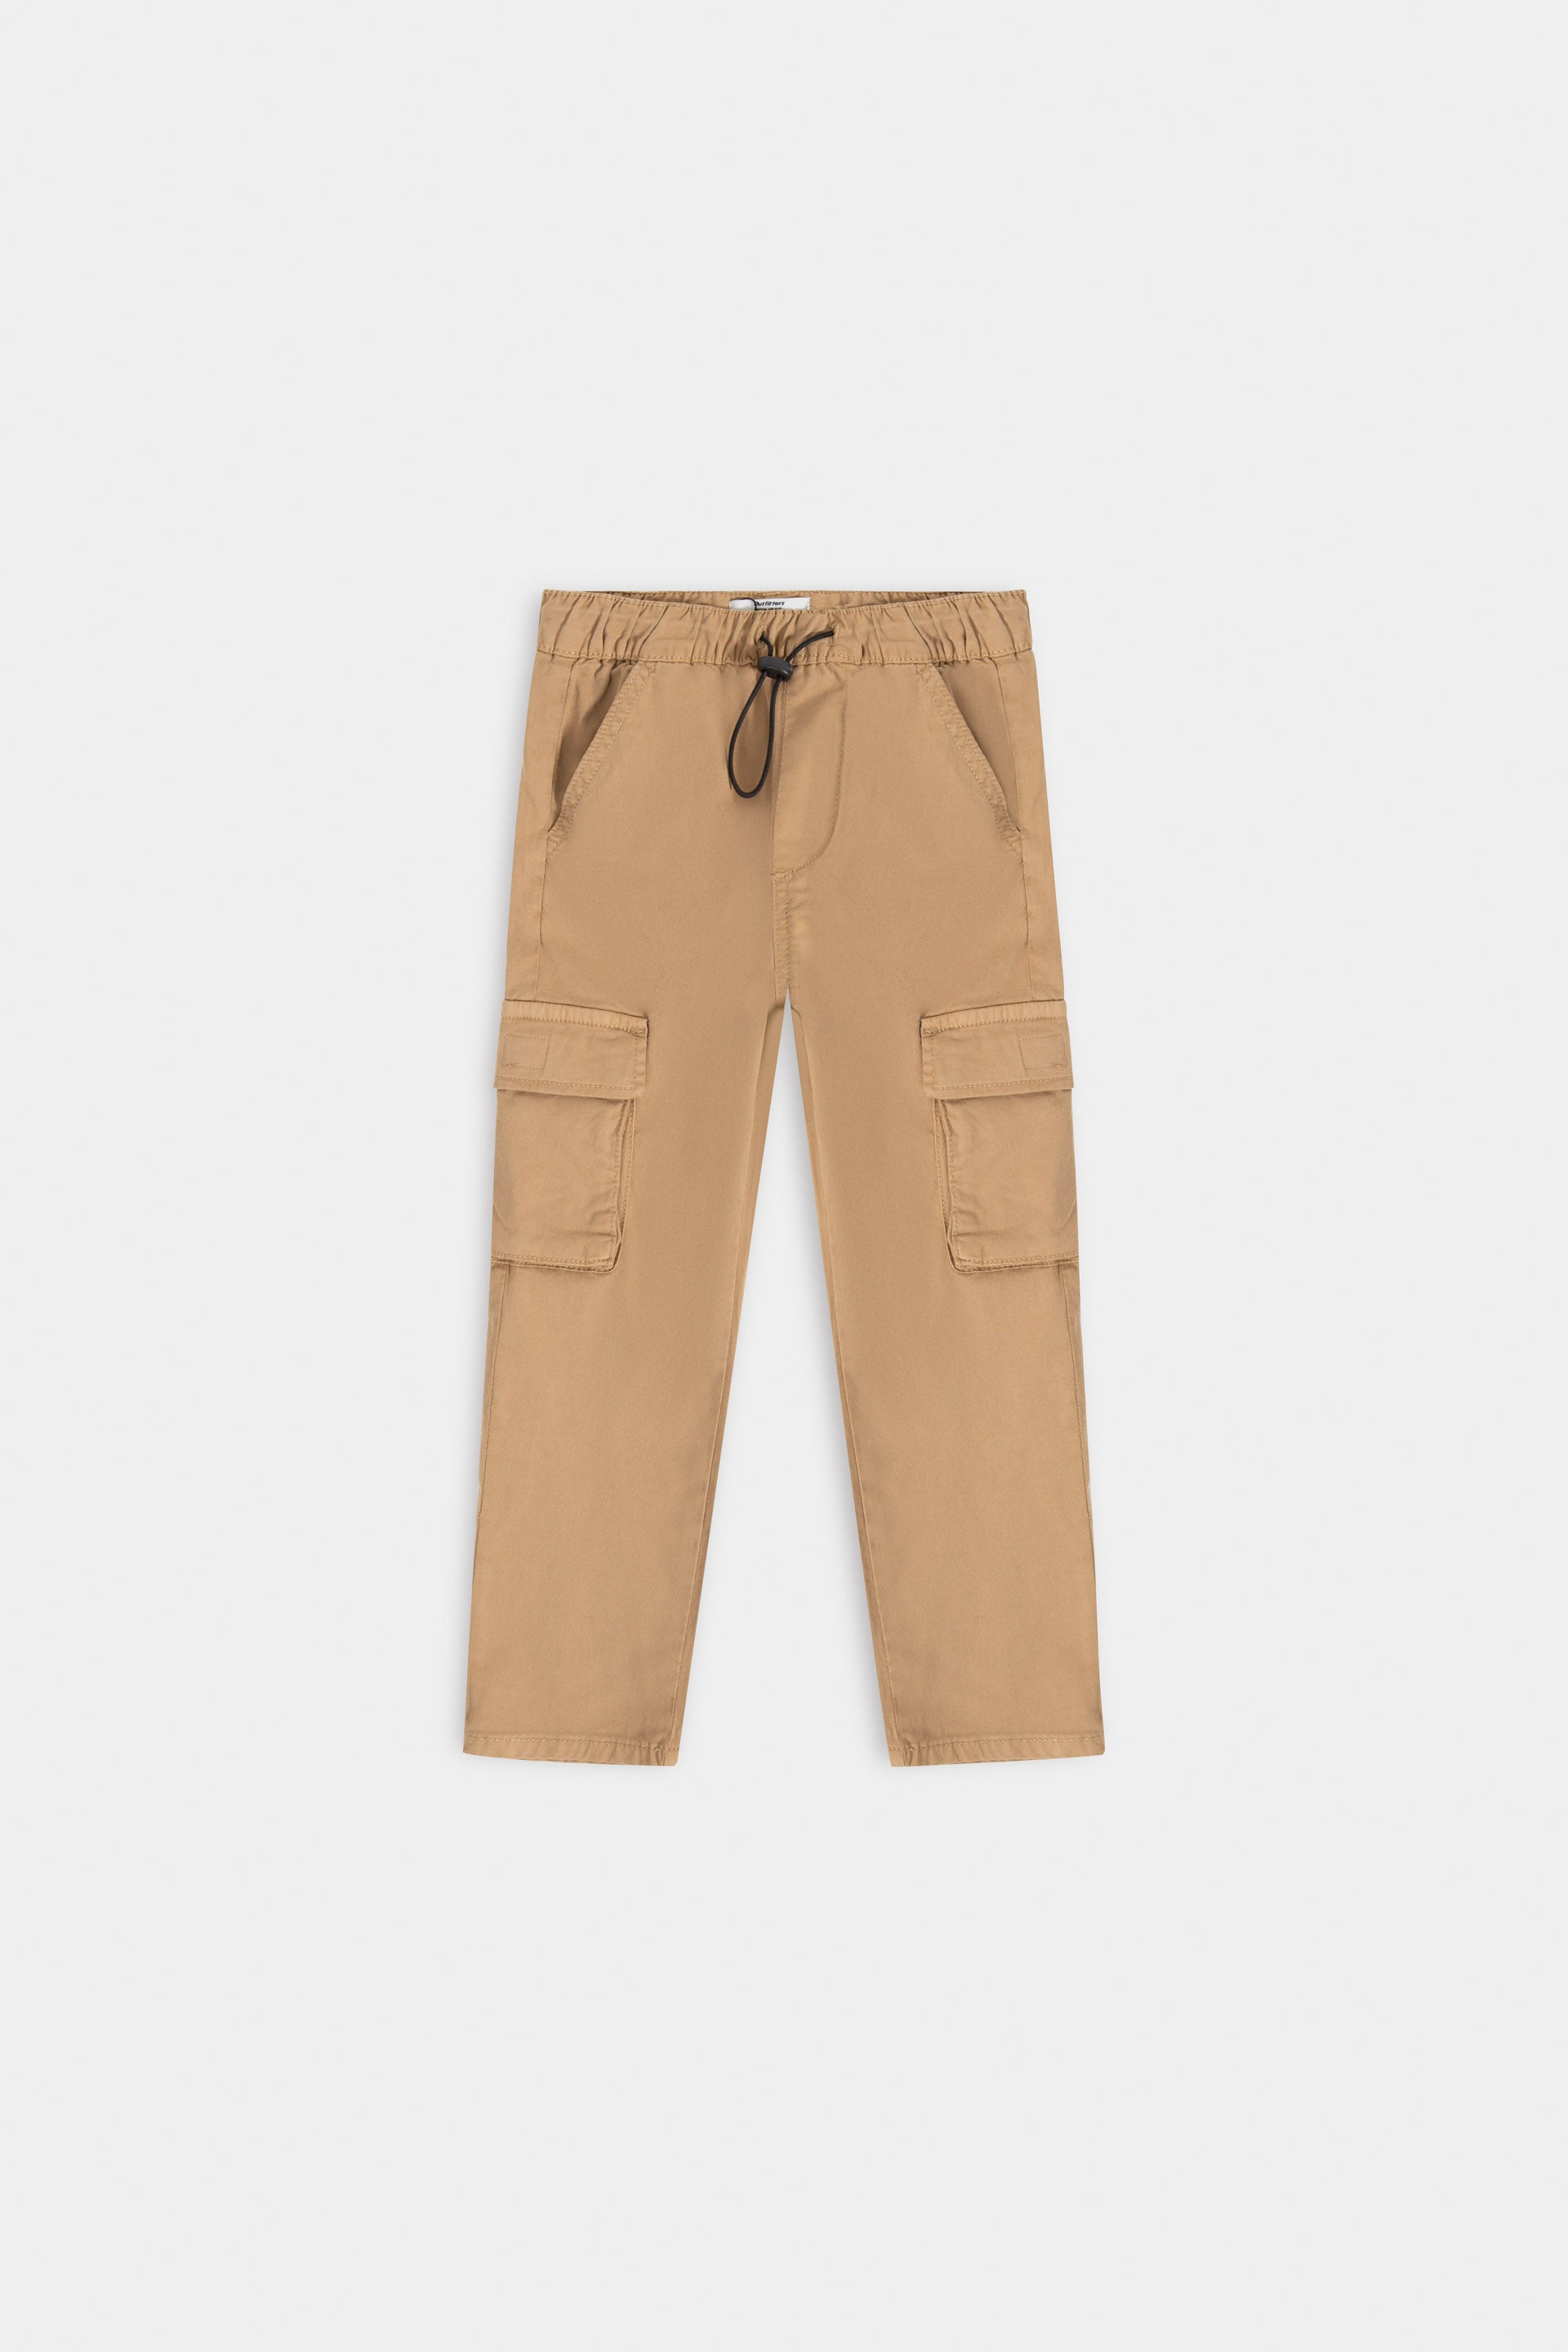 Legendary Outfitters Men's Stretch Canvas Pant – ShopEZ USA